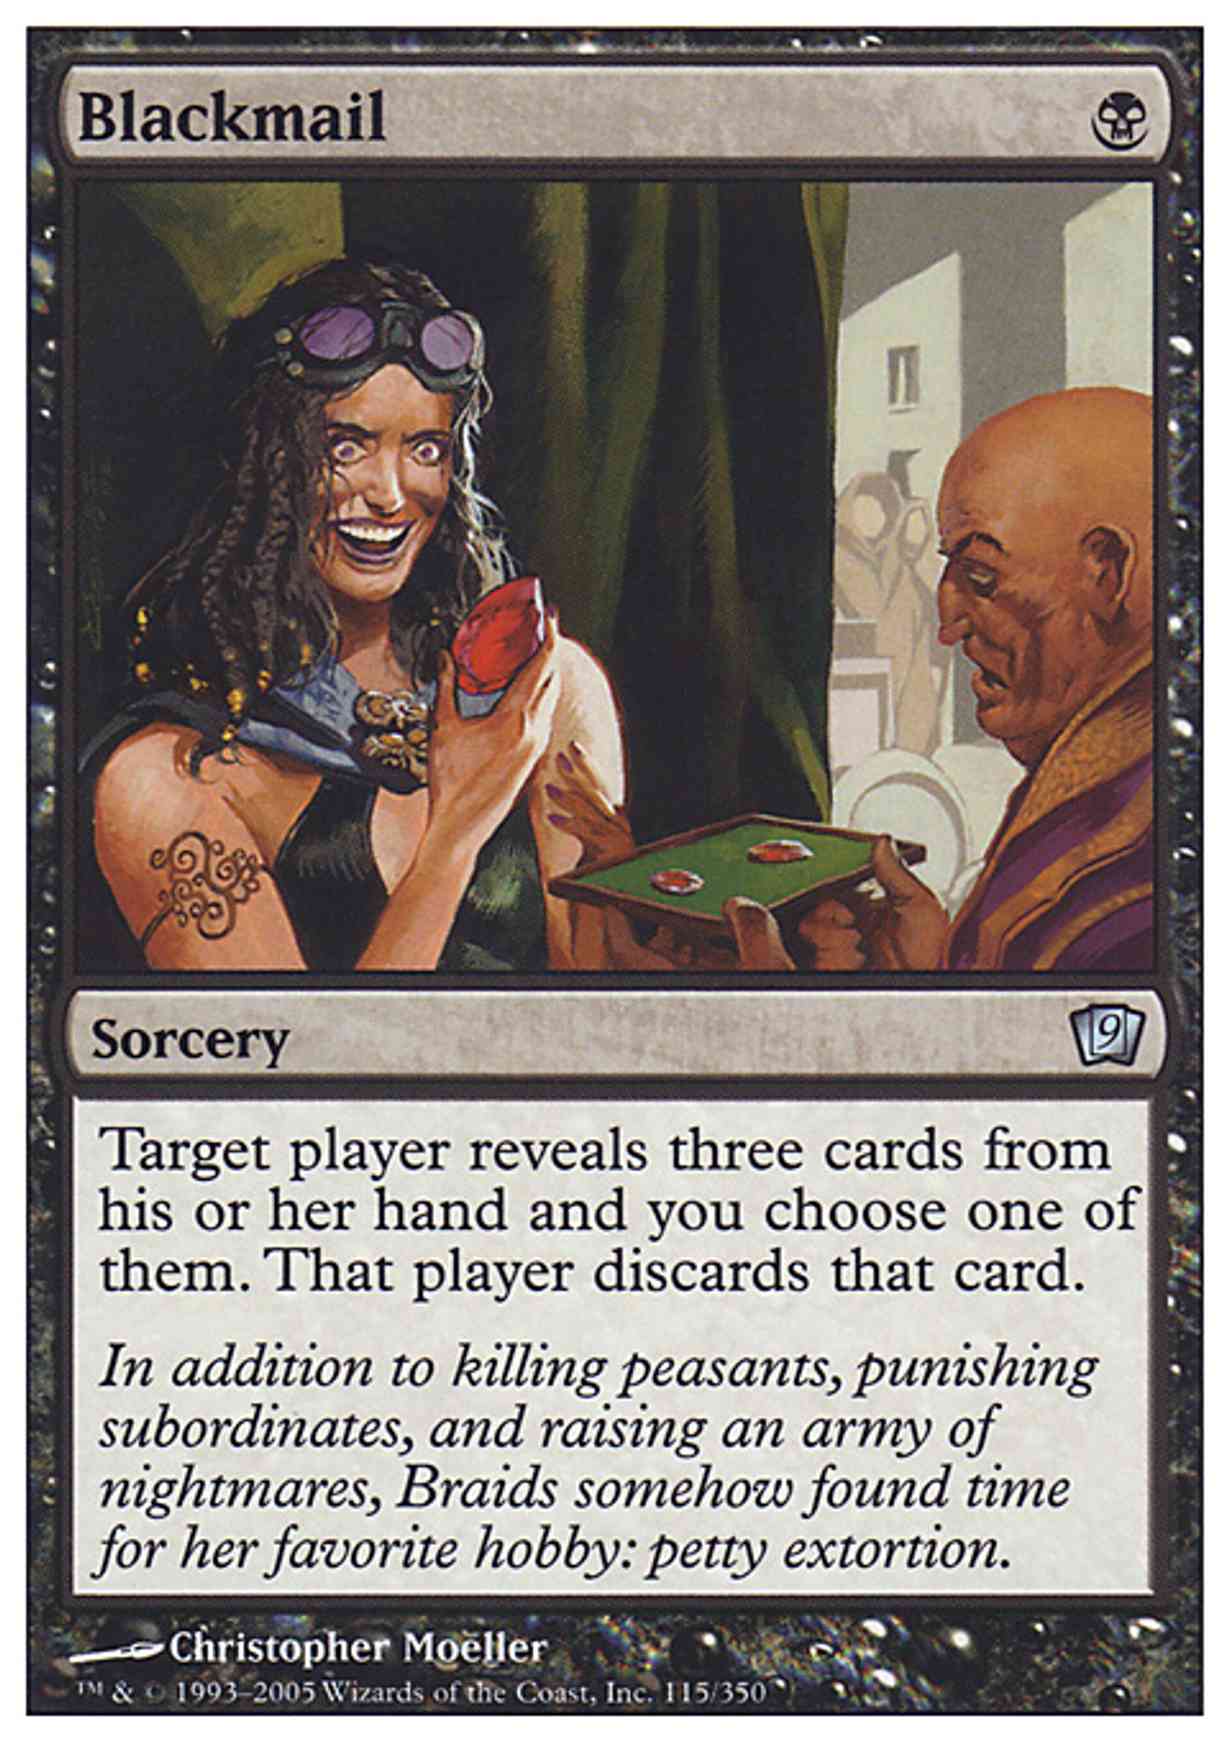 Blackmail magic card front